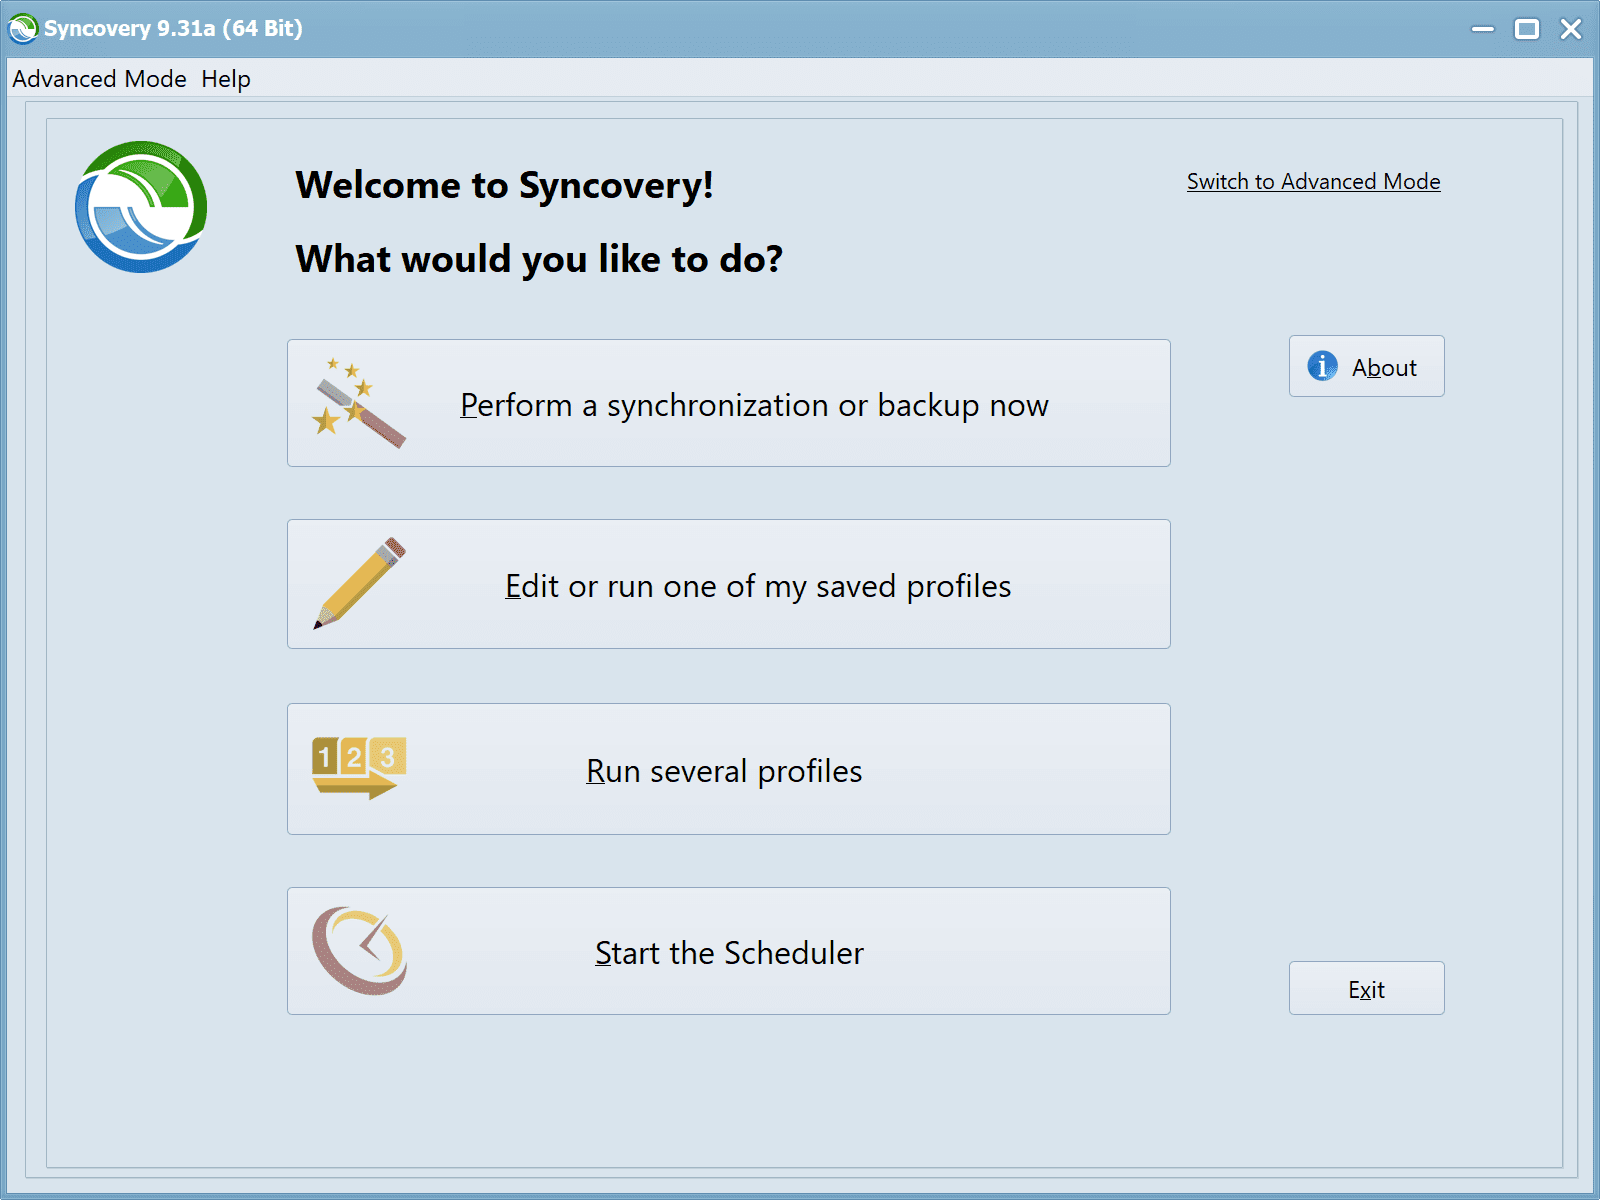 Screenshot showing Syncovery's Welcome Page, where the user can choose to create new jobs, or edit or run existing ones, or start the scheduler